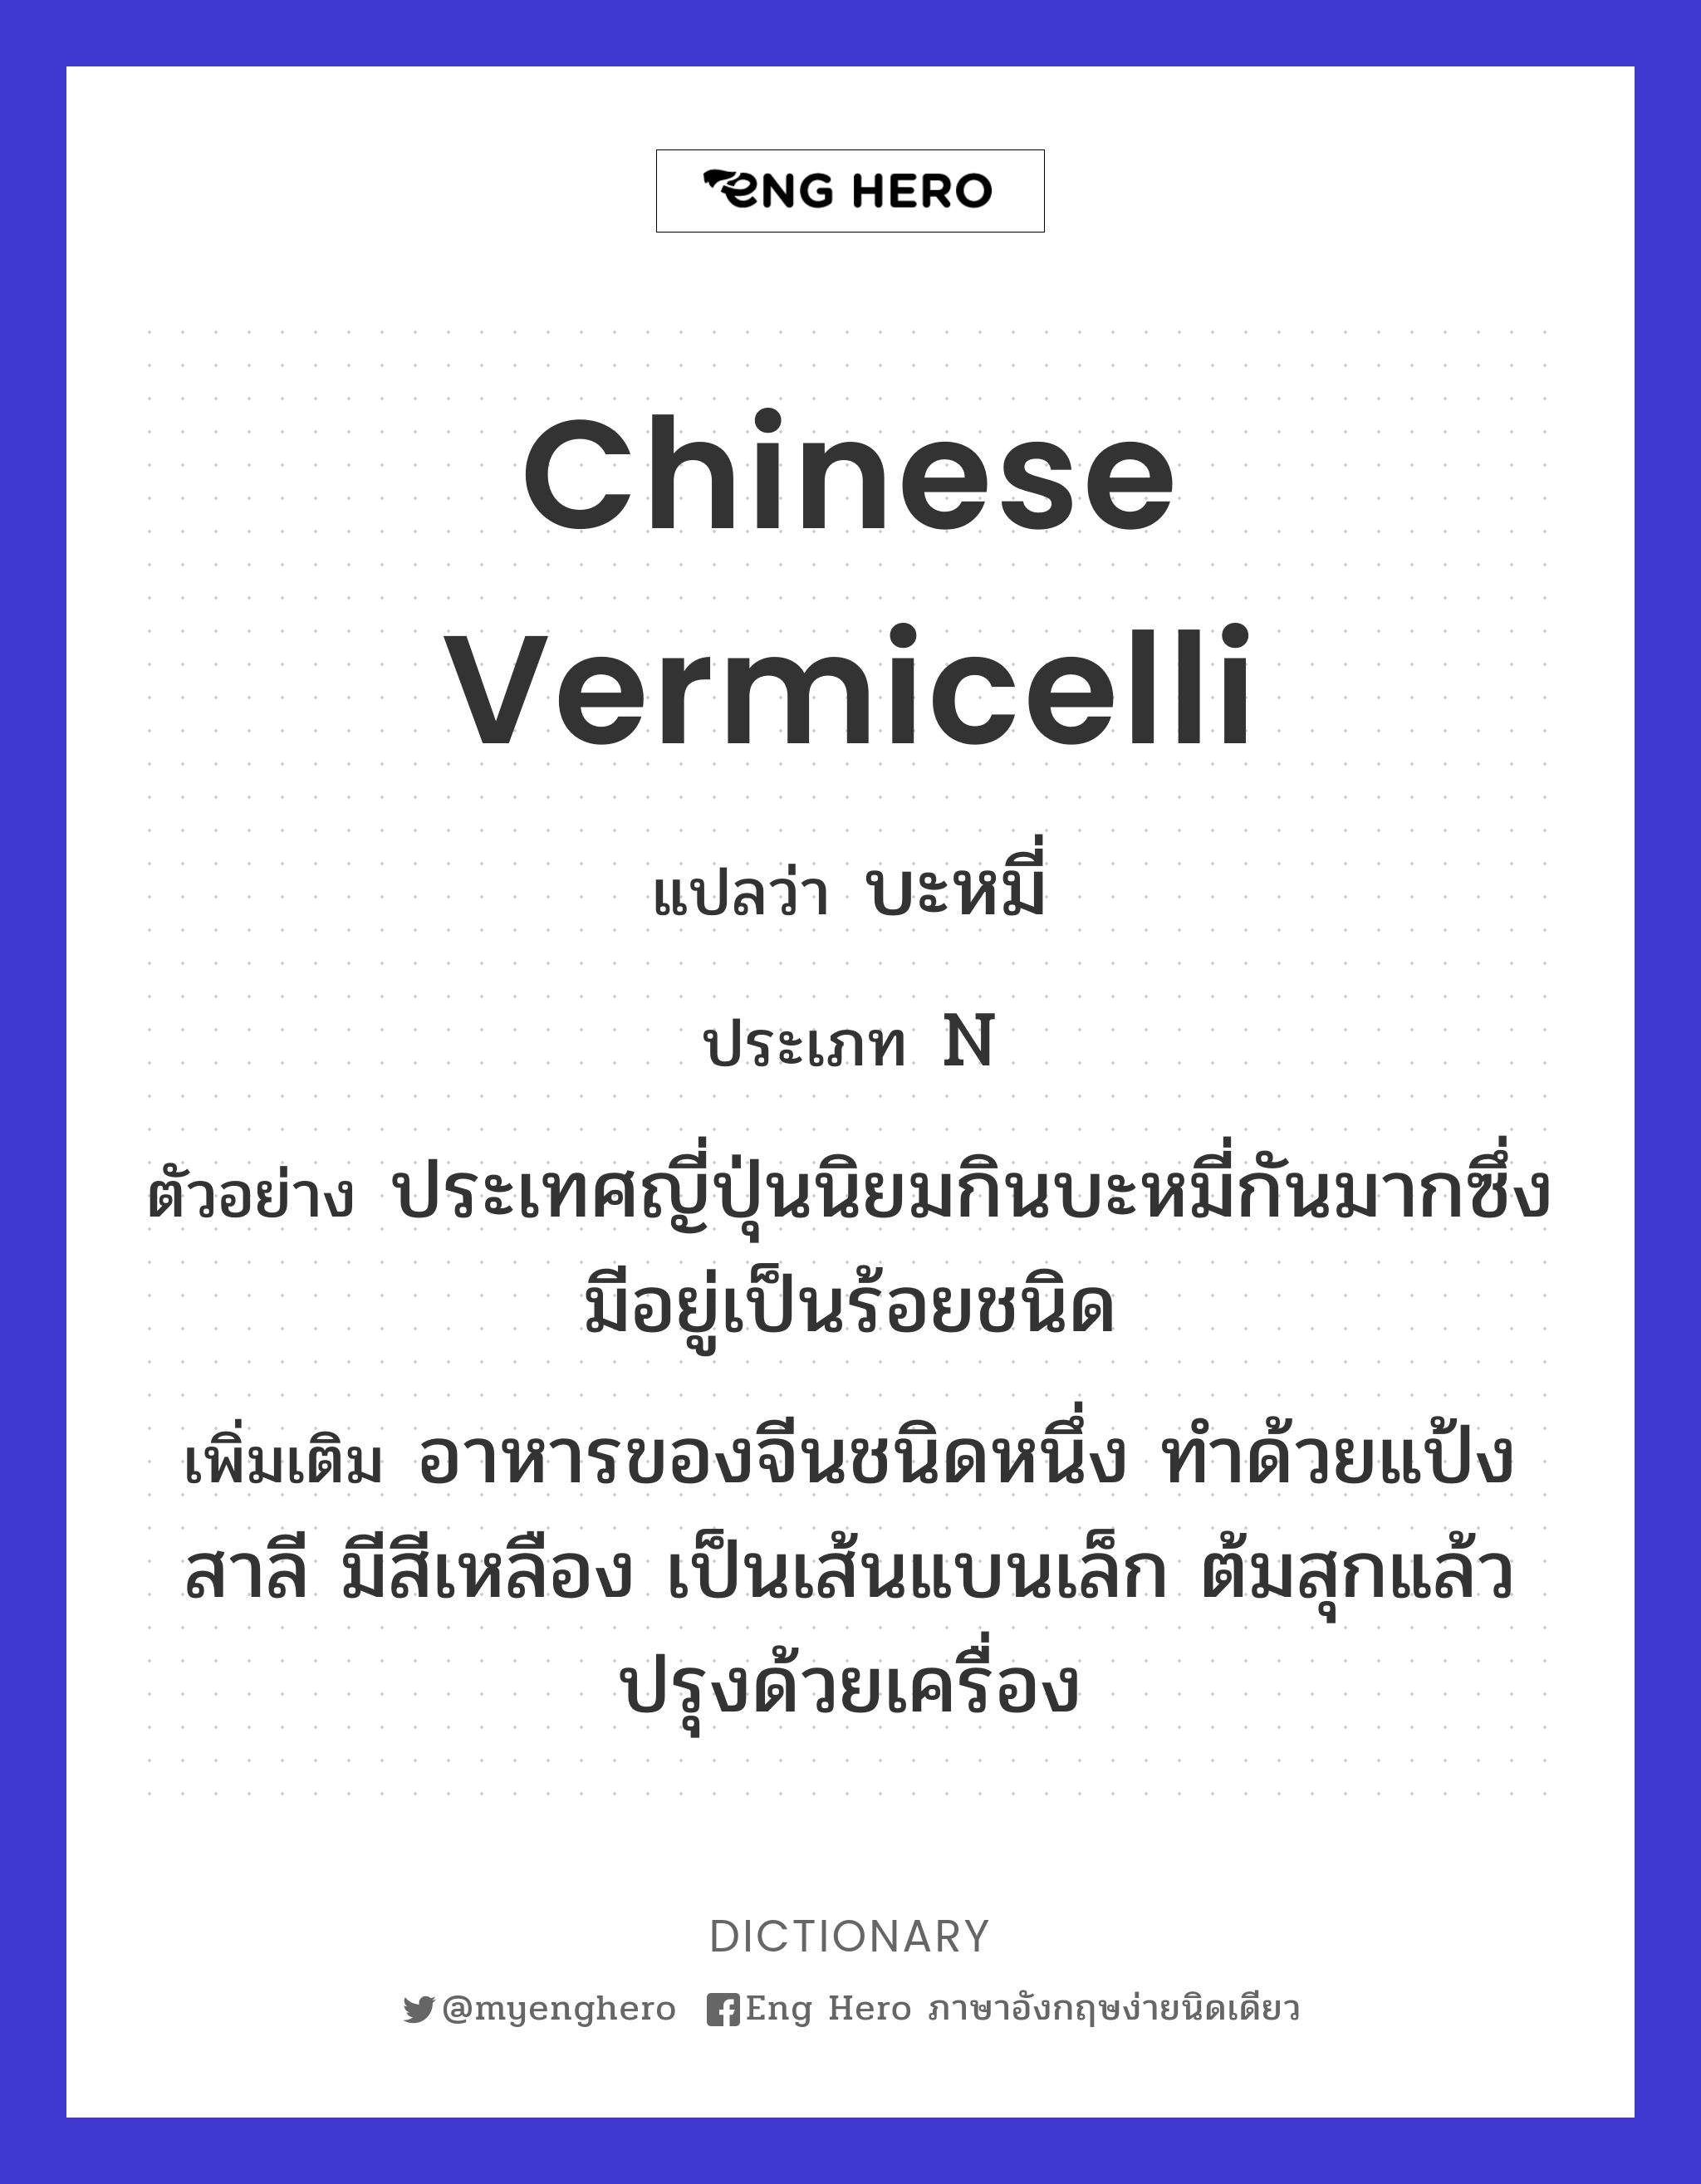 Chinese vermicelli